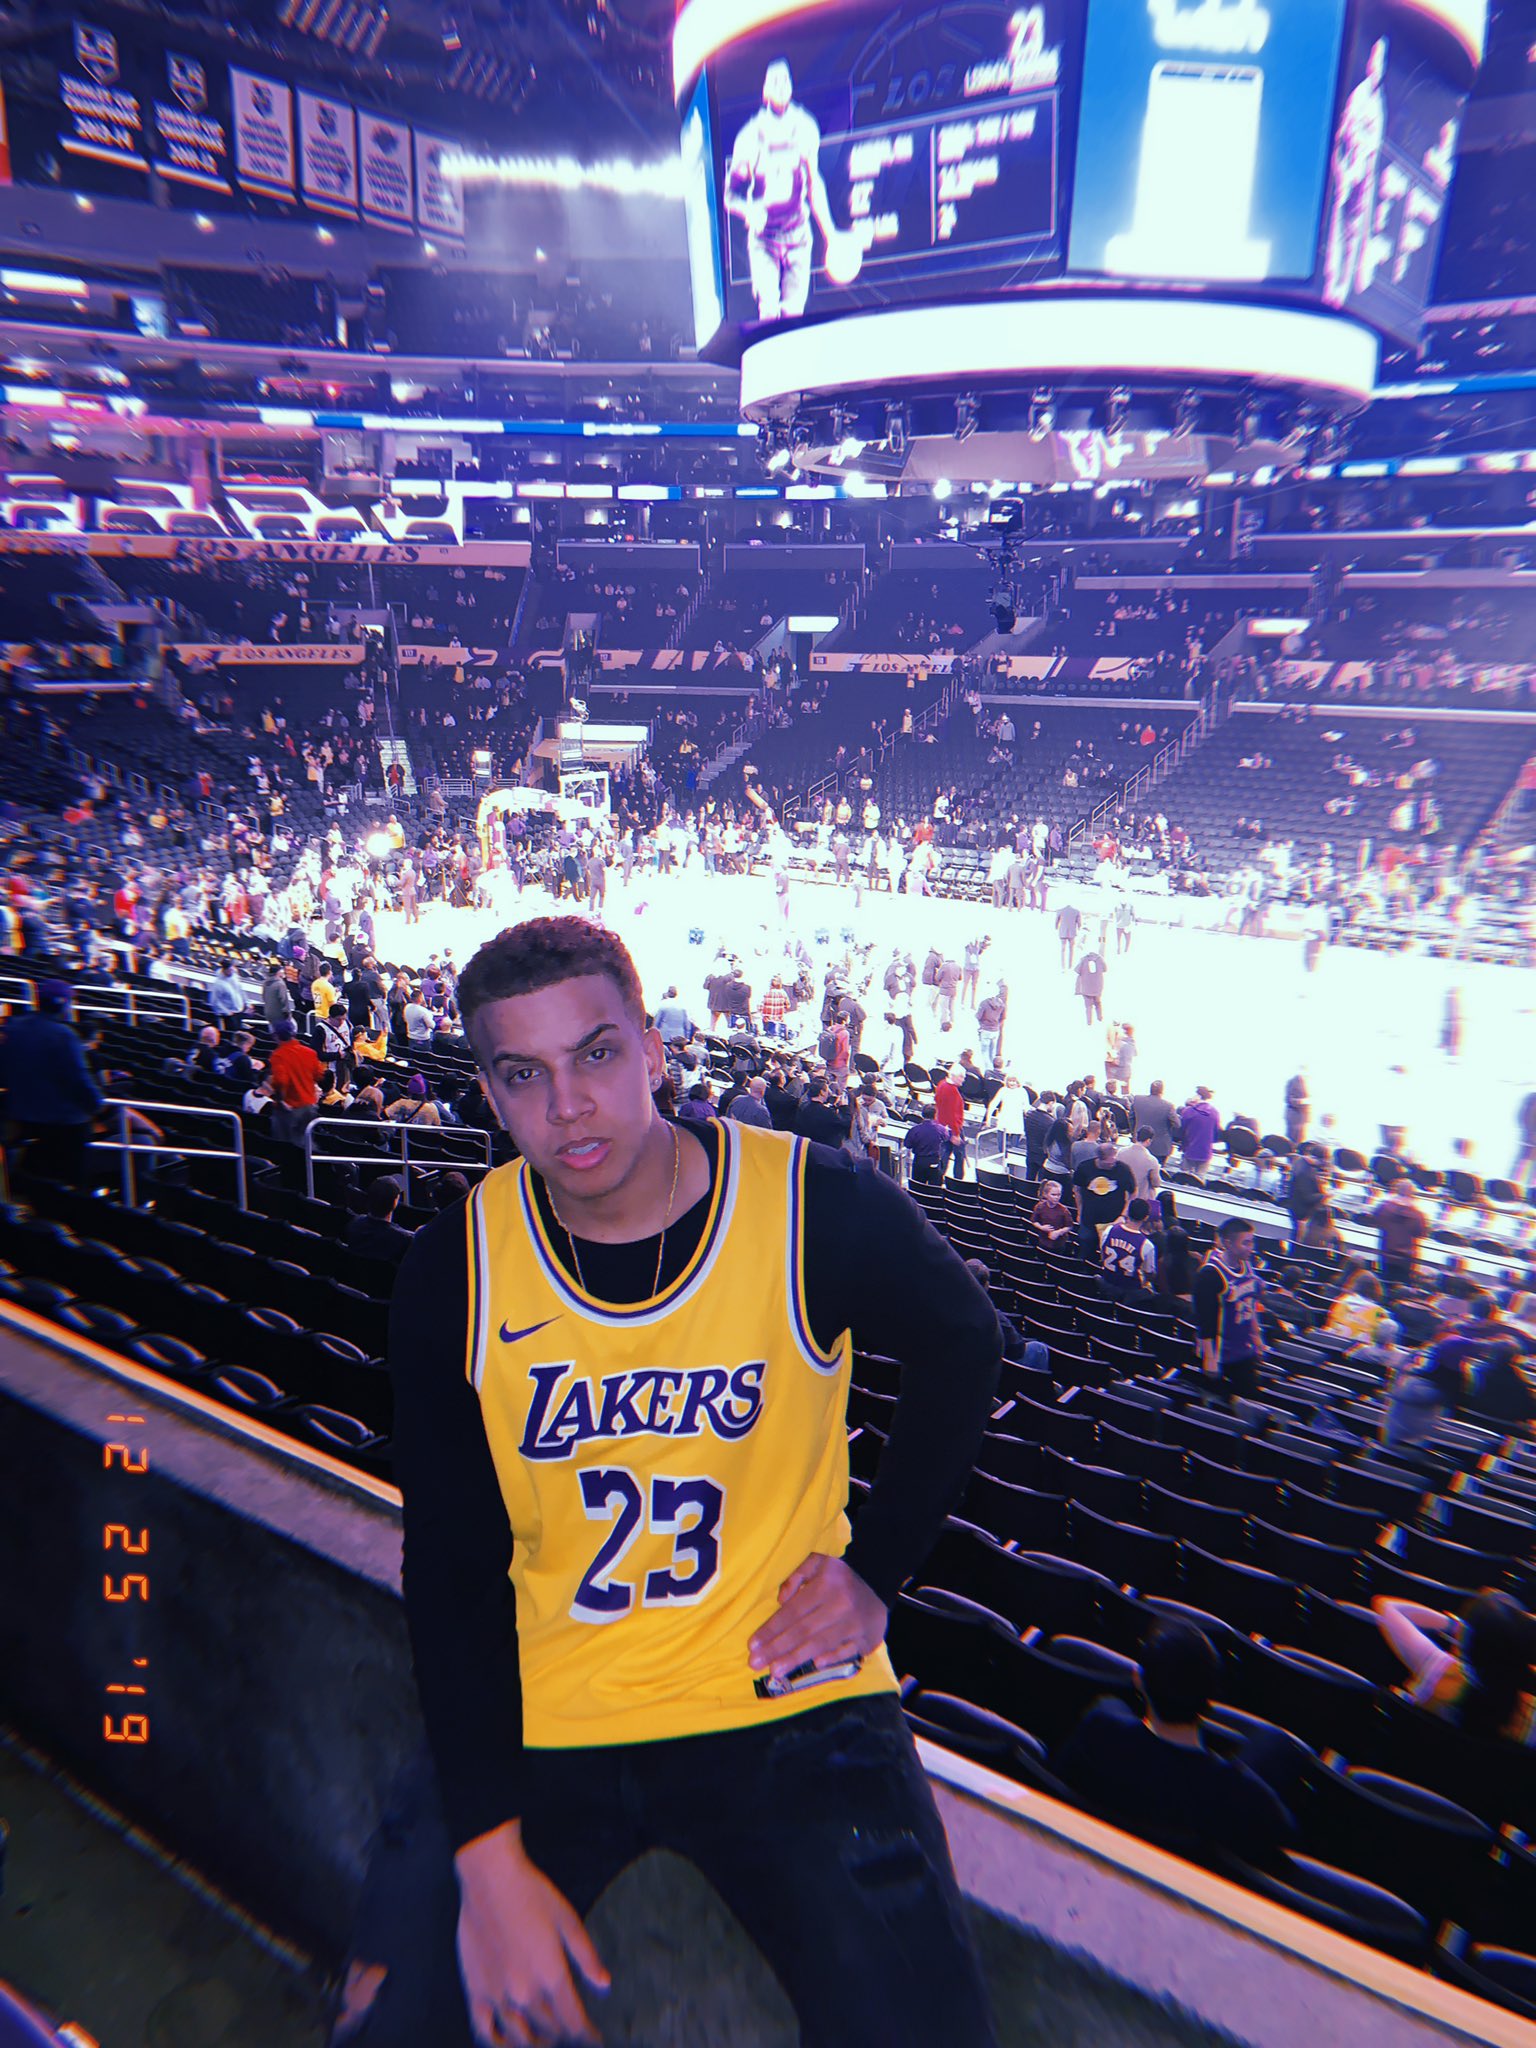 lakers jersey outfit tumblr